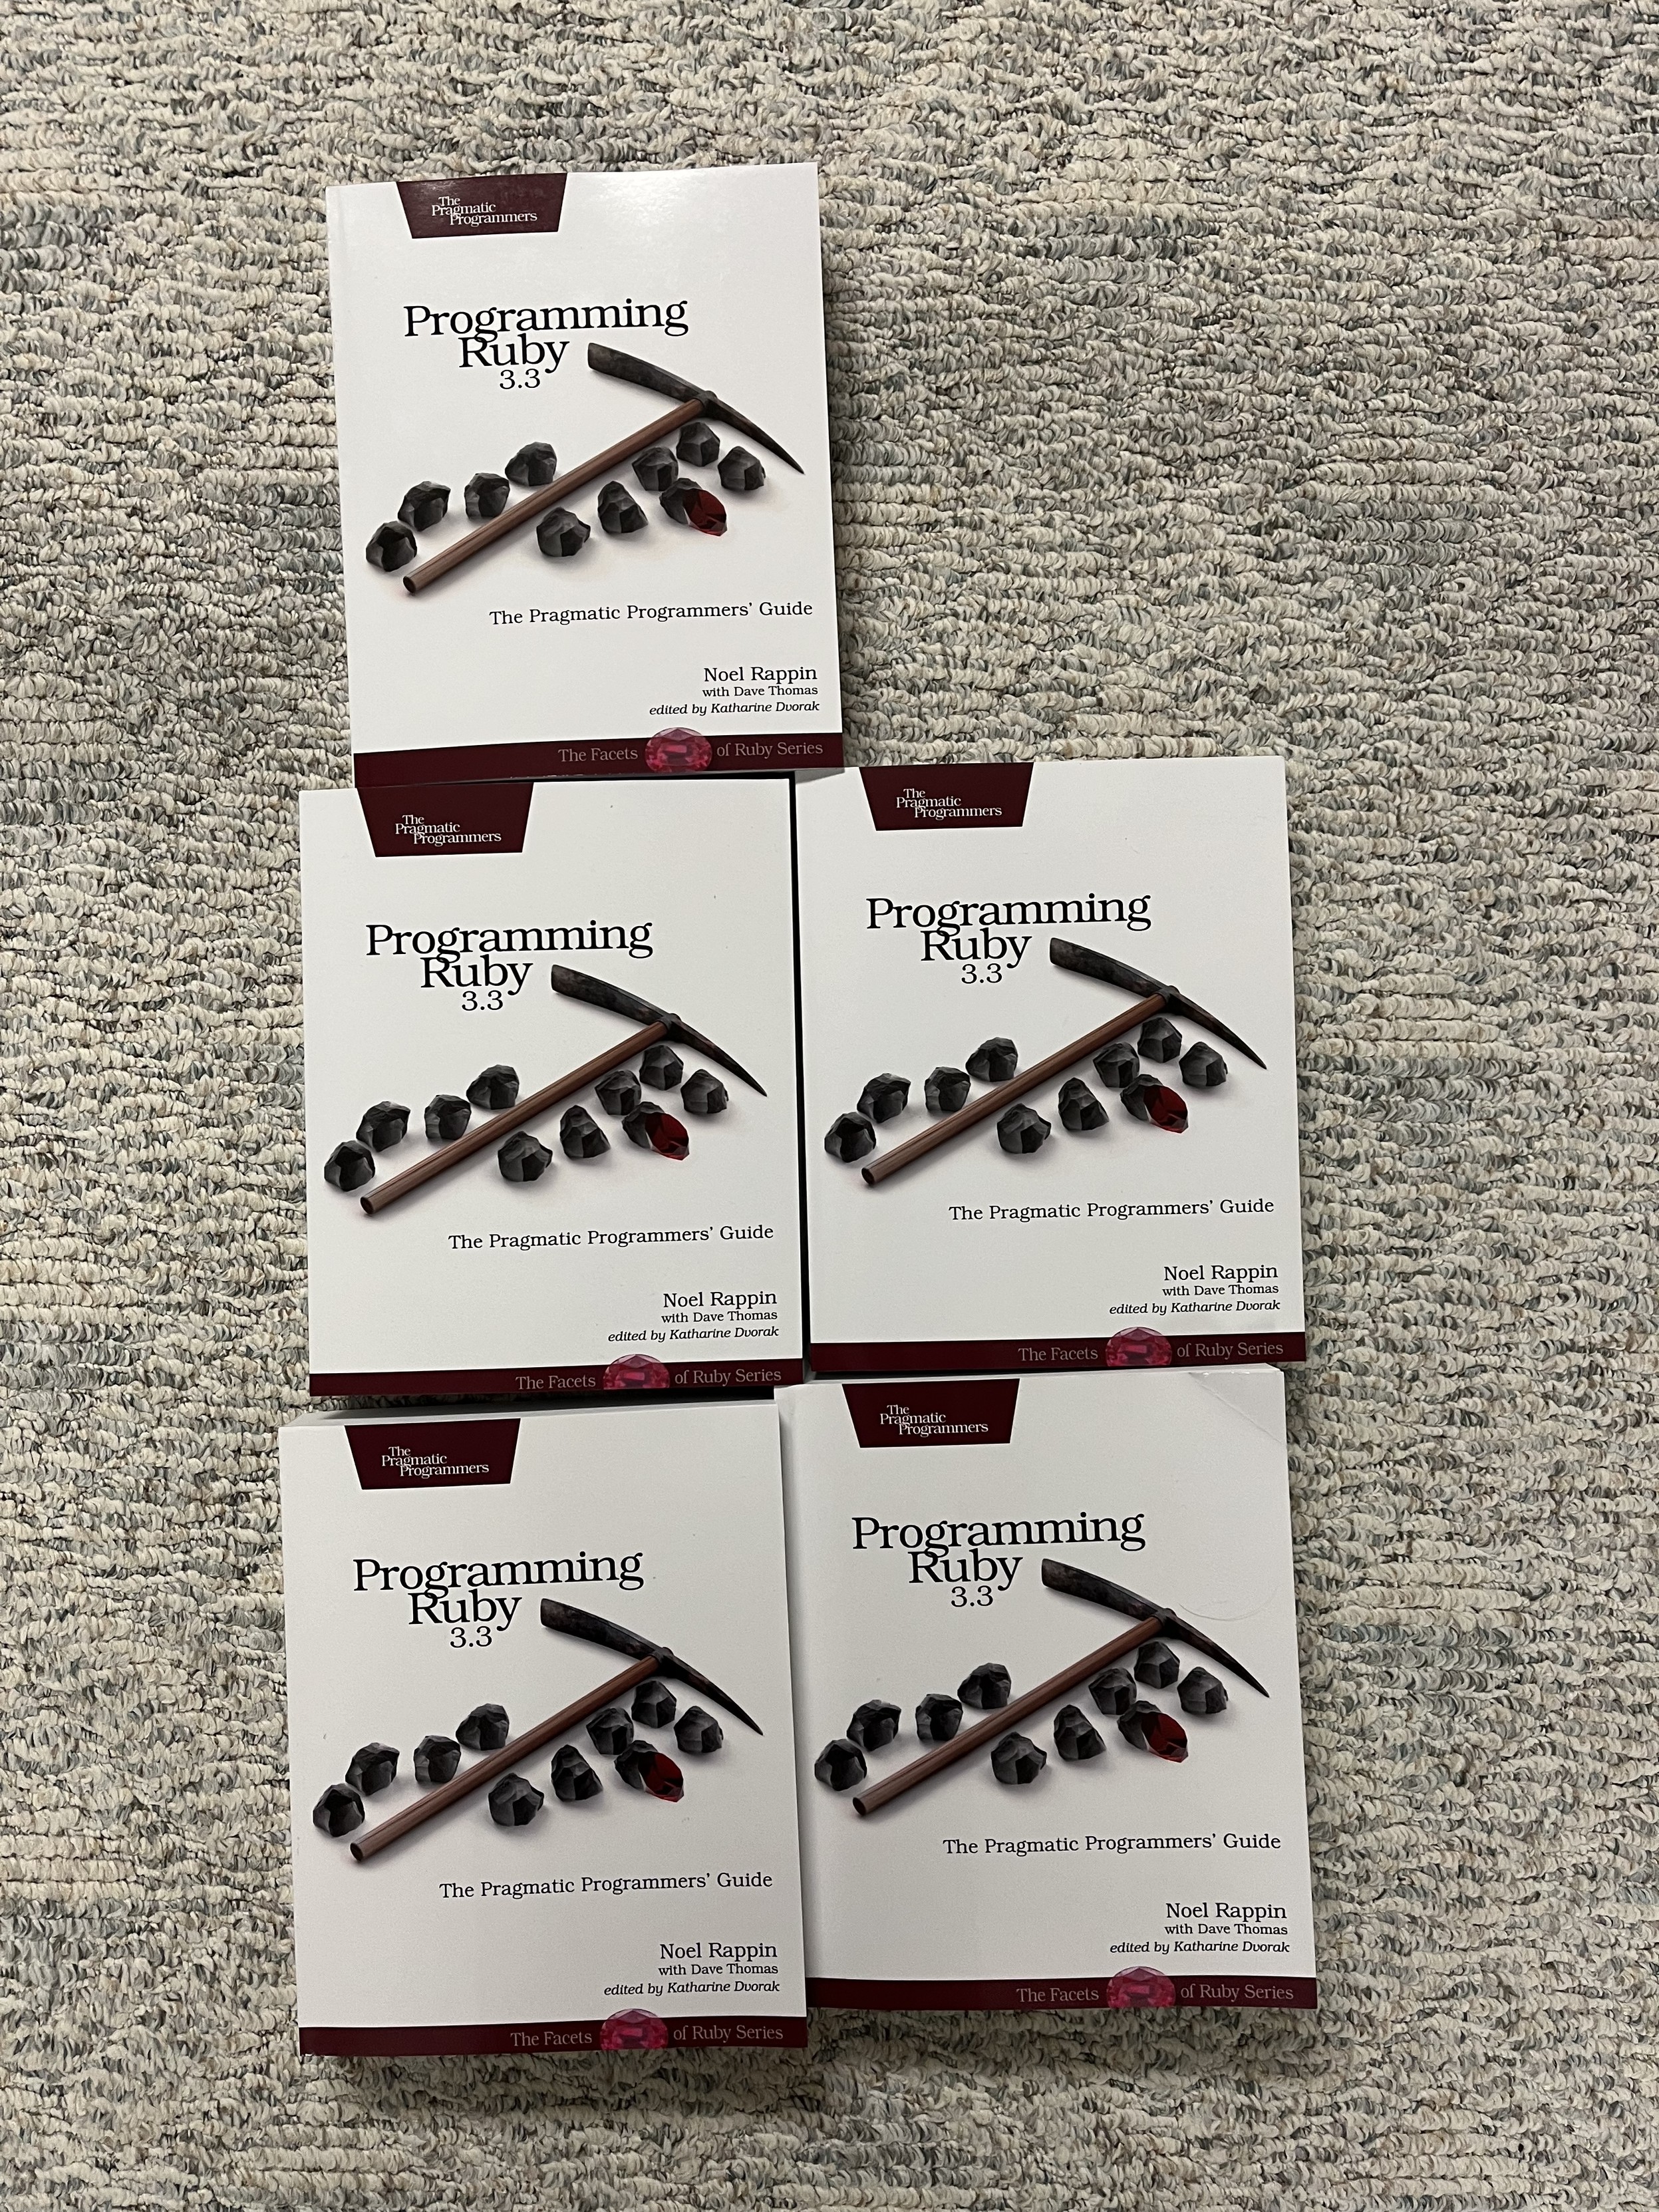 Five author copies of Programming Ruby 3.3